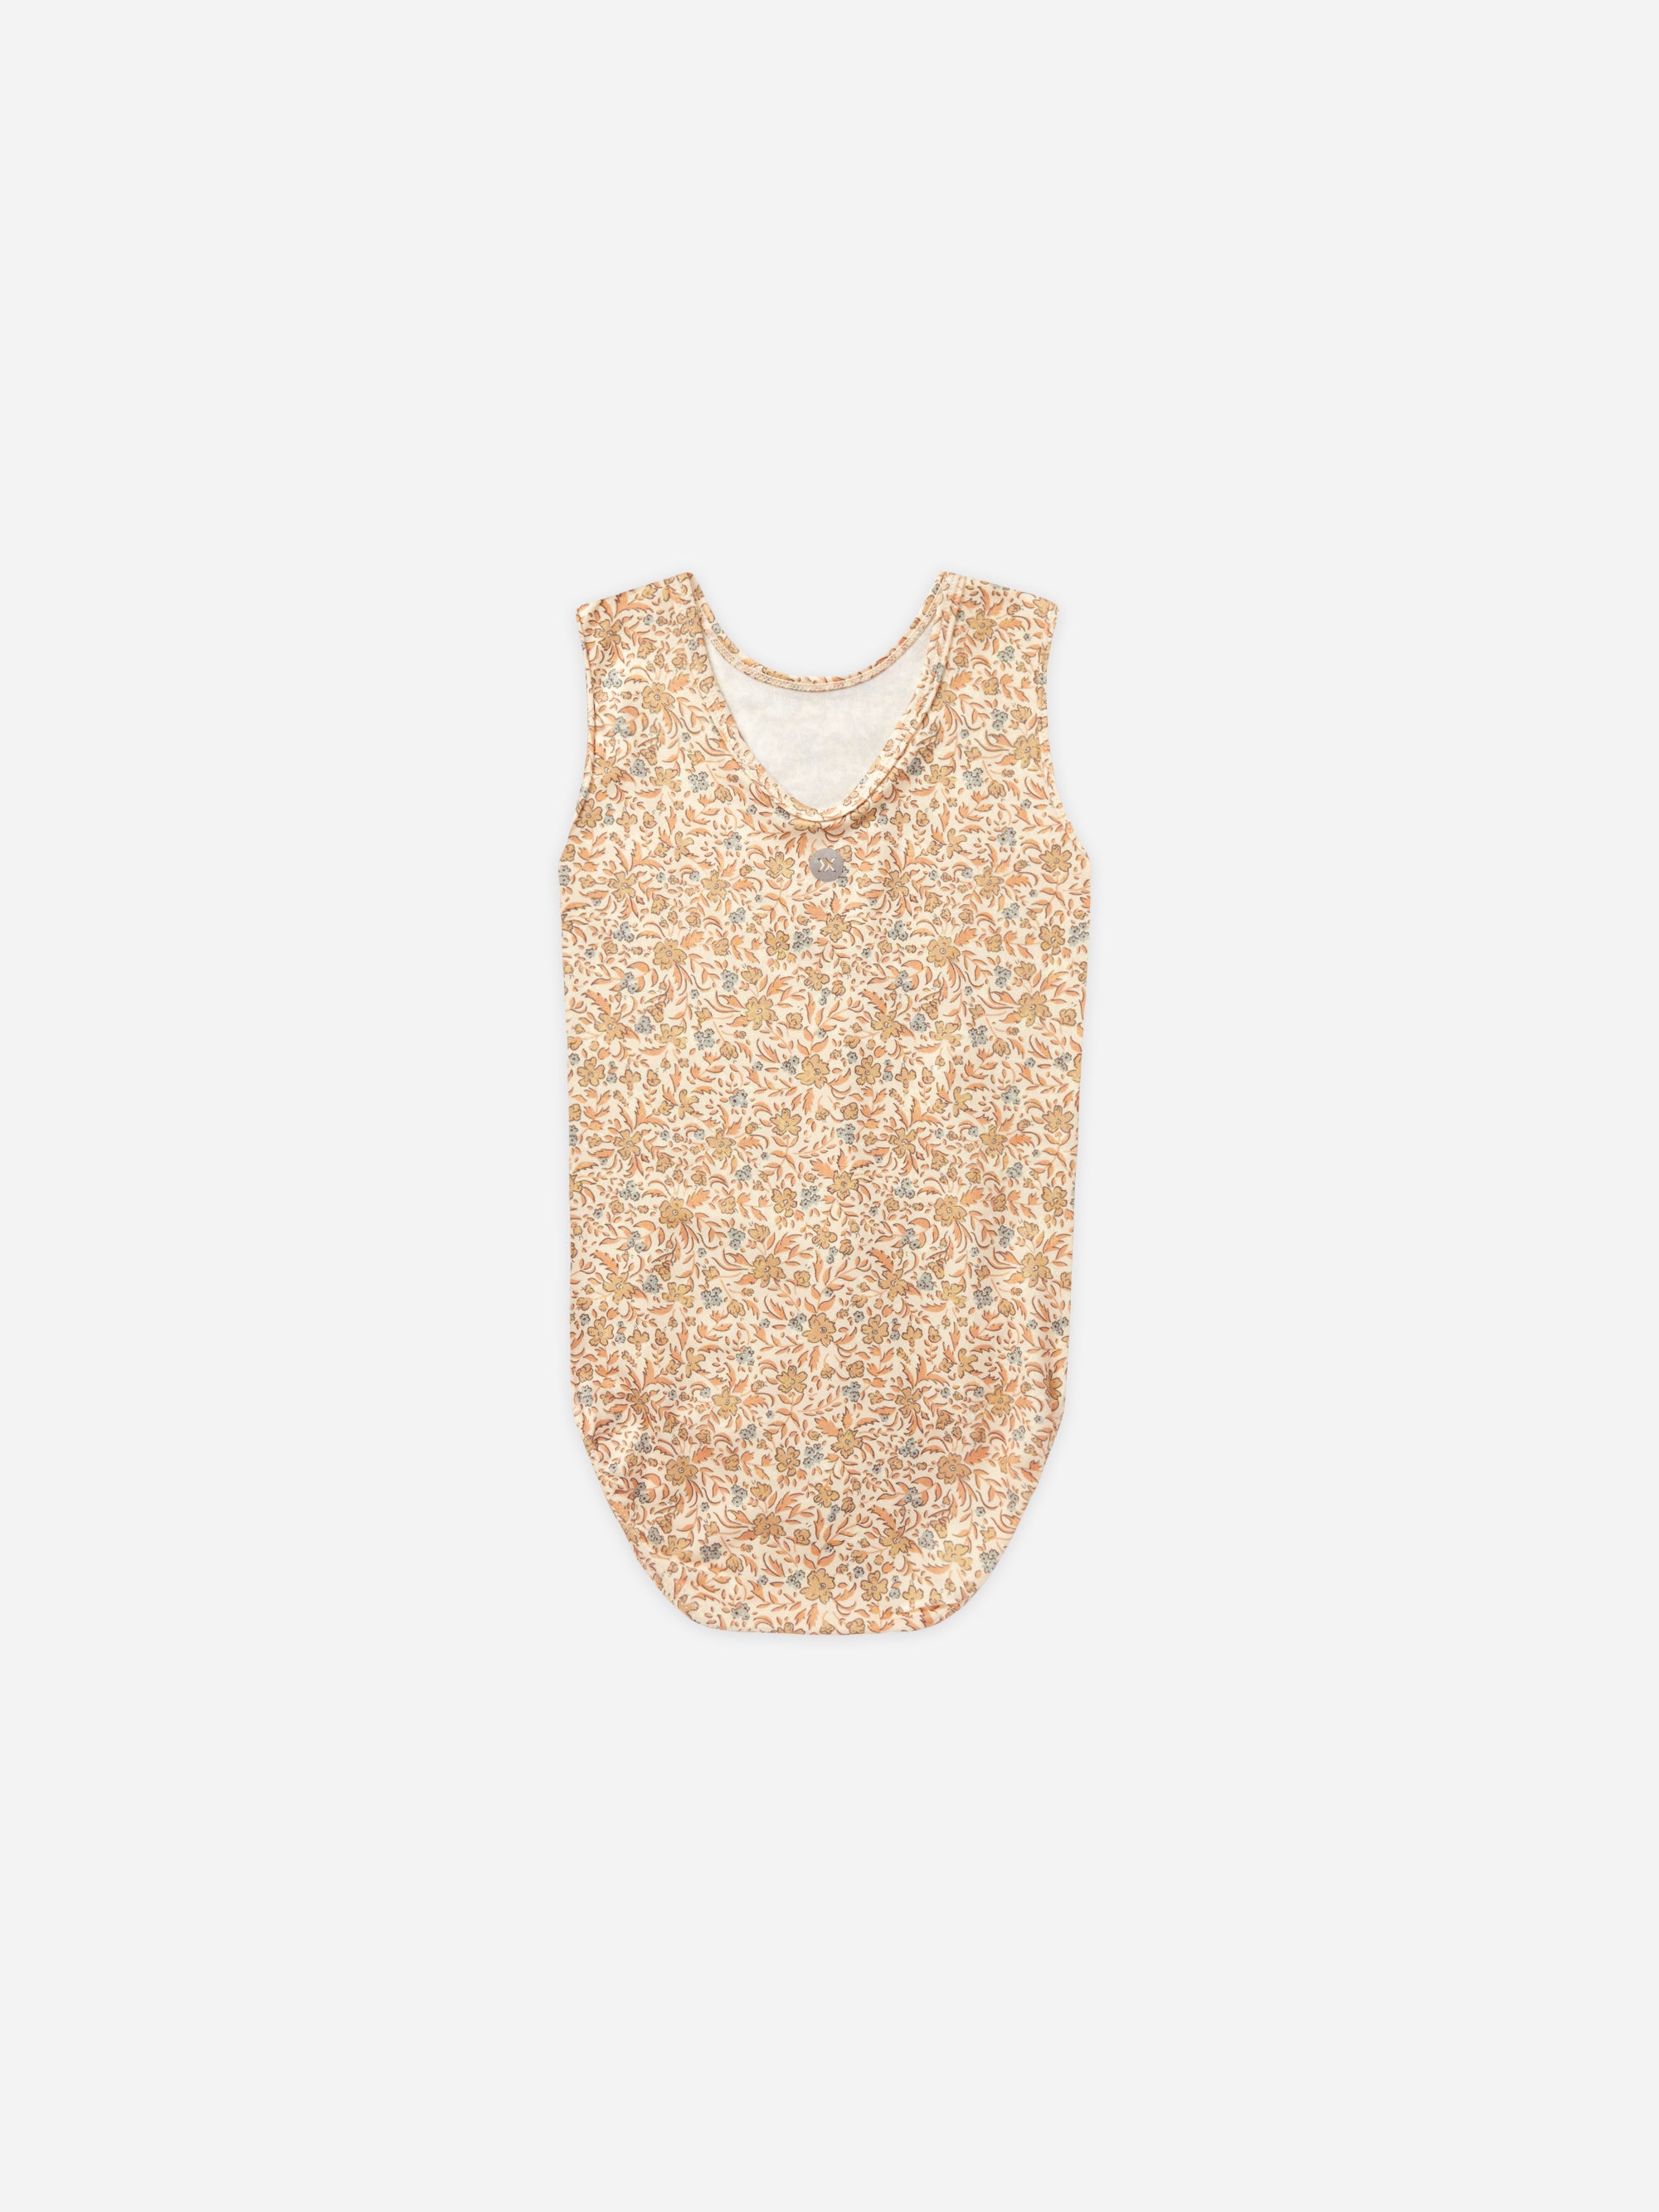 Basic Leotard || Blossom - Rylee + Cru | Kids Clothes | Trendy Baby Clothes | Modern Infant Outfits |